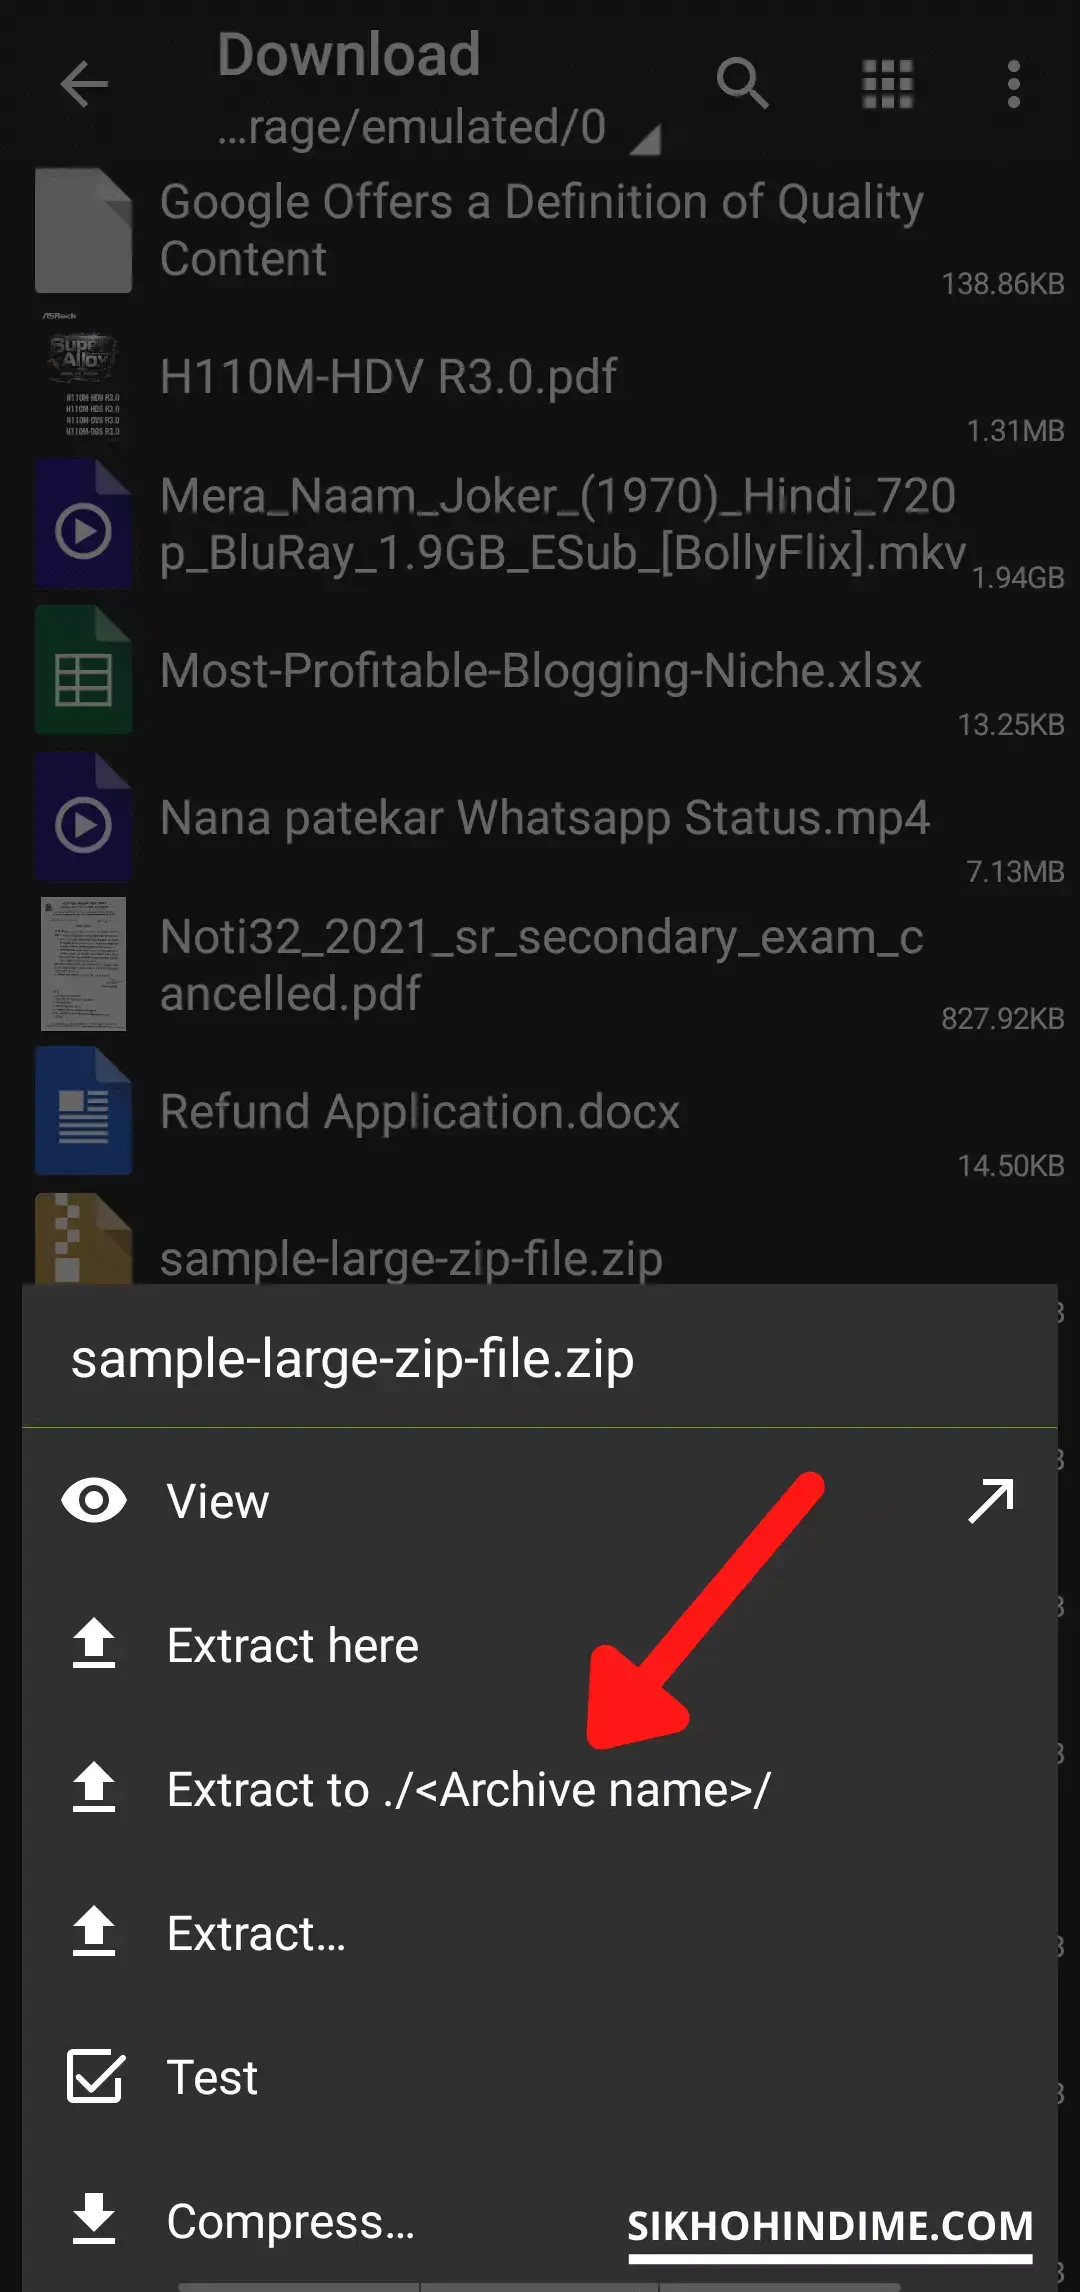 Click on Extract to Archive Name